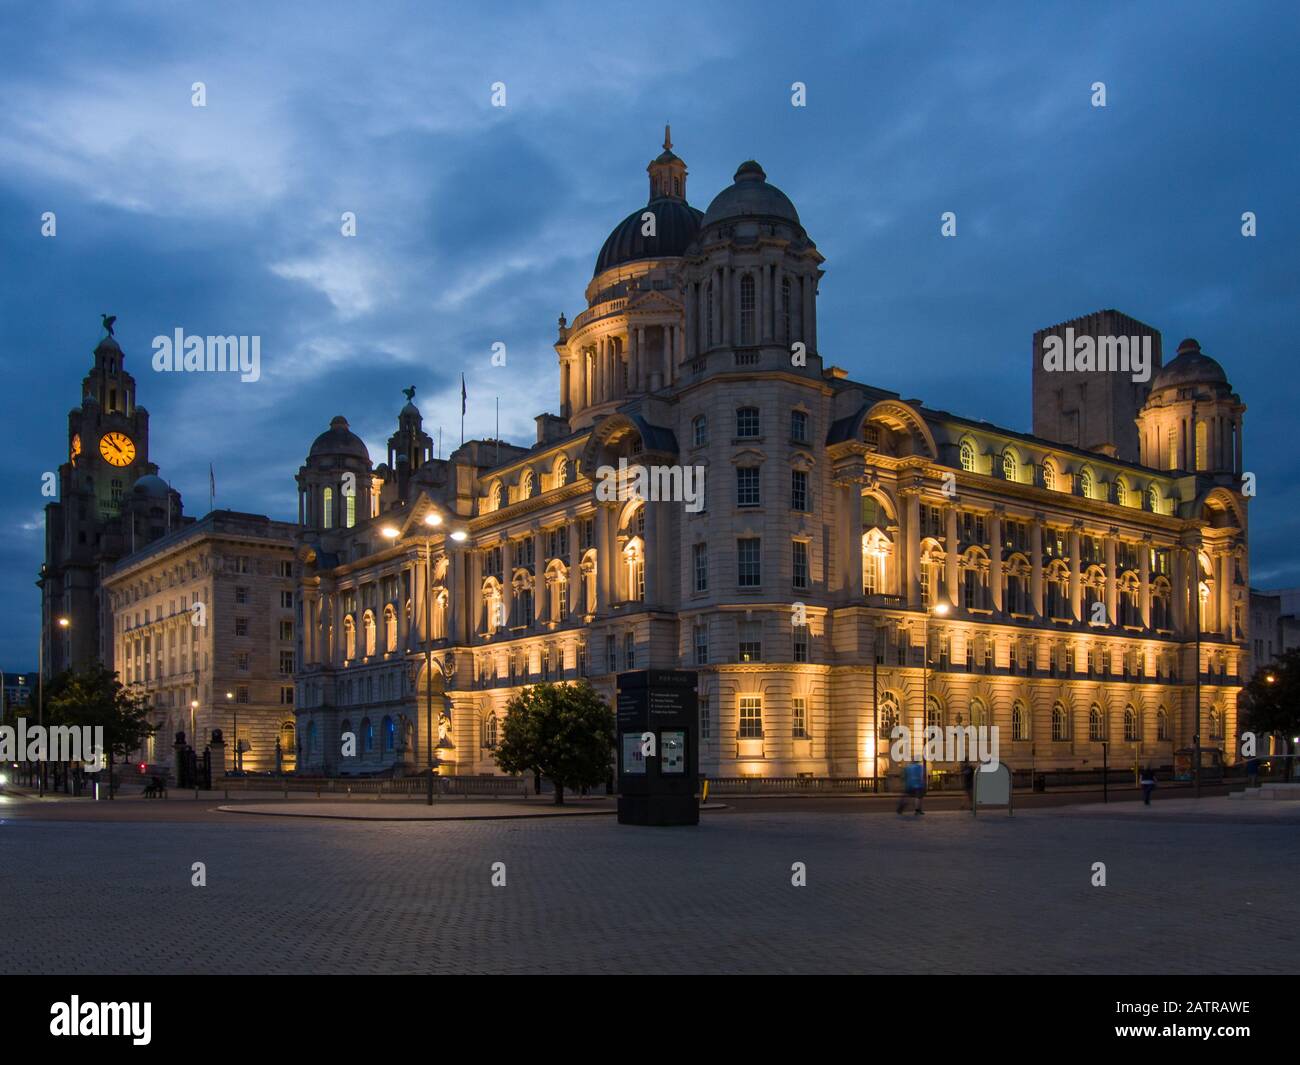 The Port of Liverpool Building Stock Photo